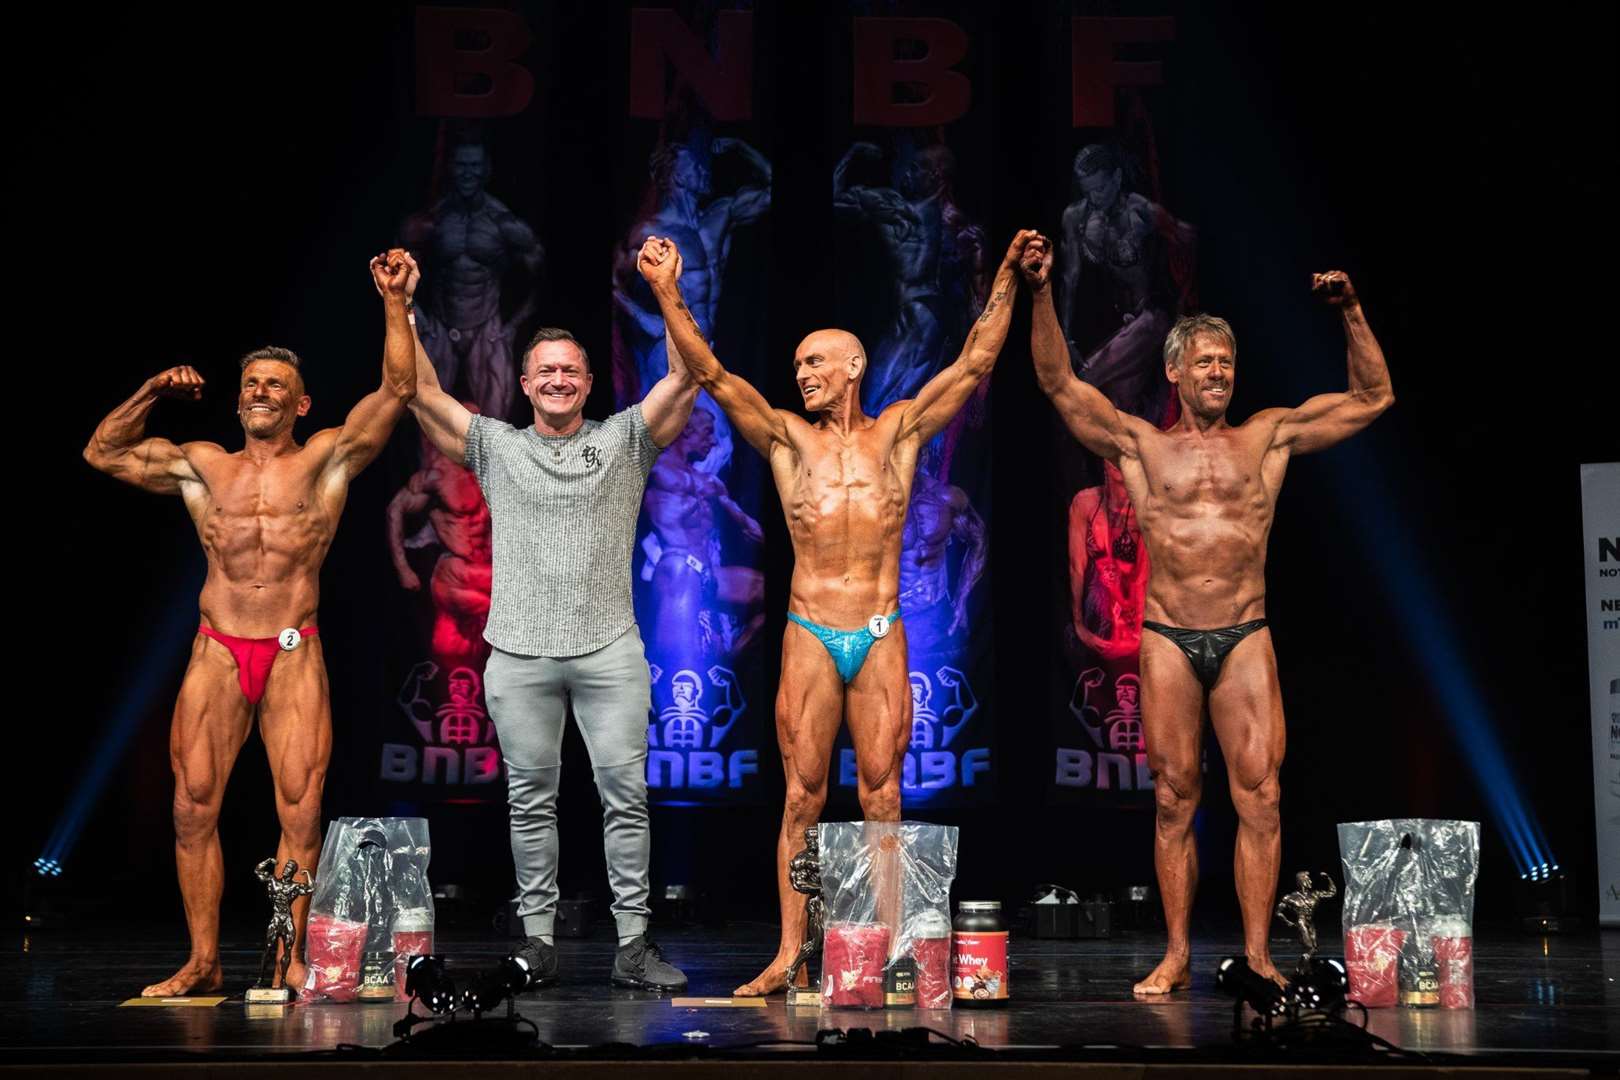 Marshall Clark, here with other winners, was crowned Scottish over 50s BNBF bodybuilding champion